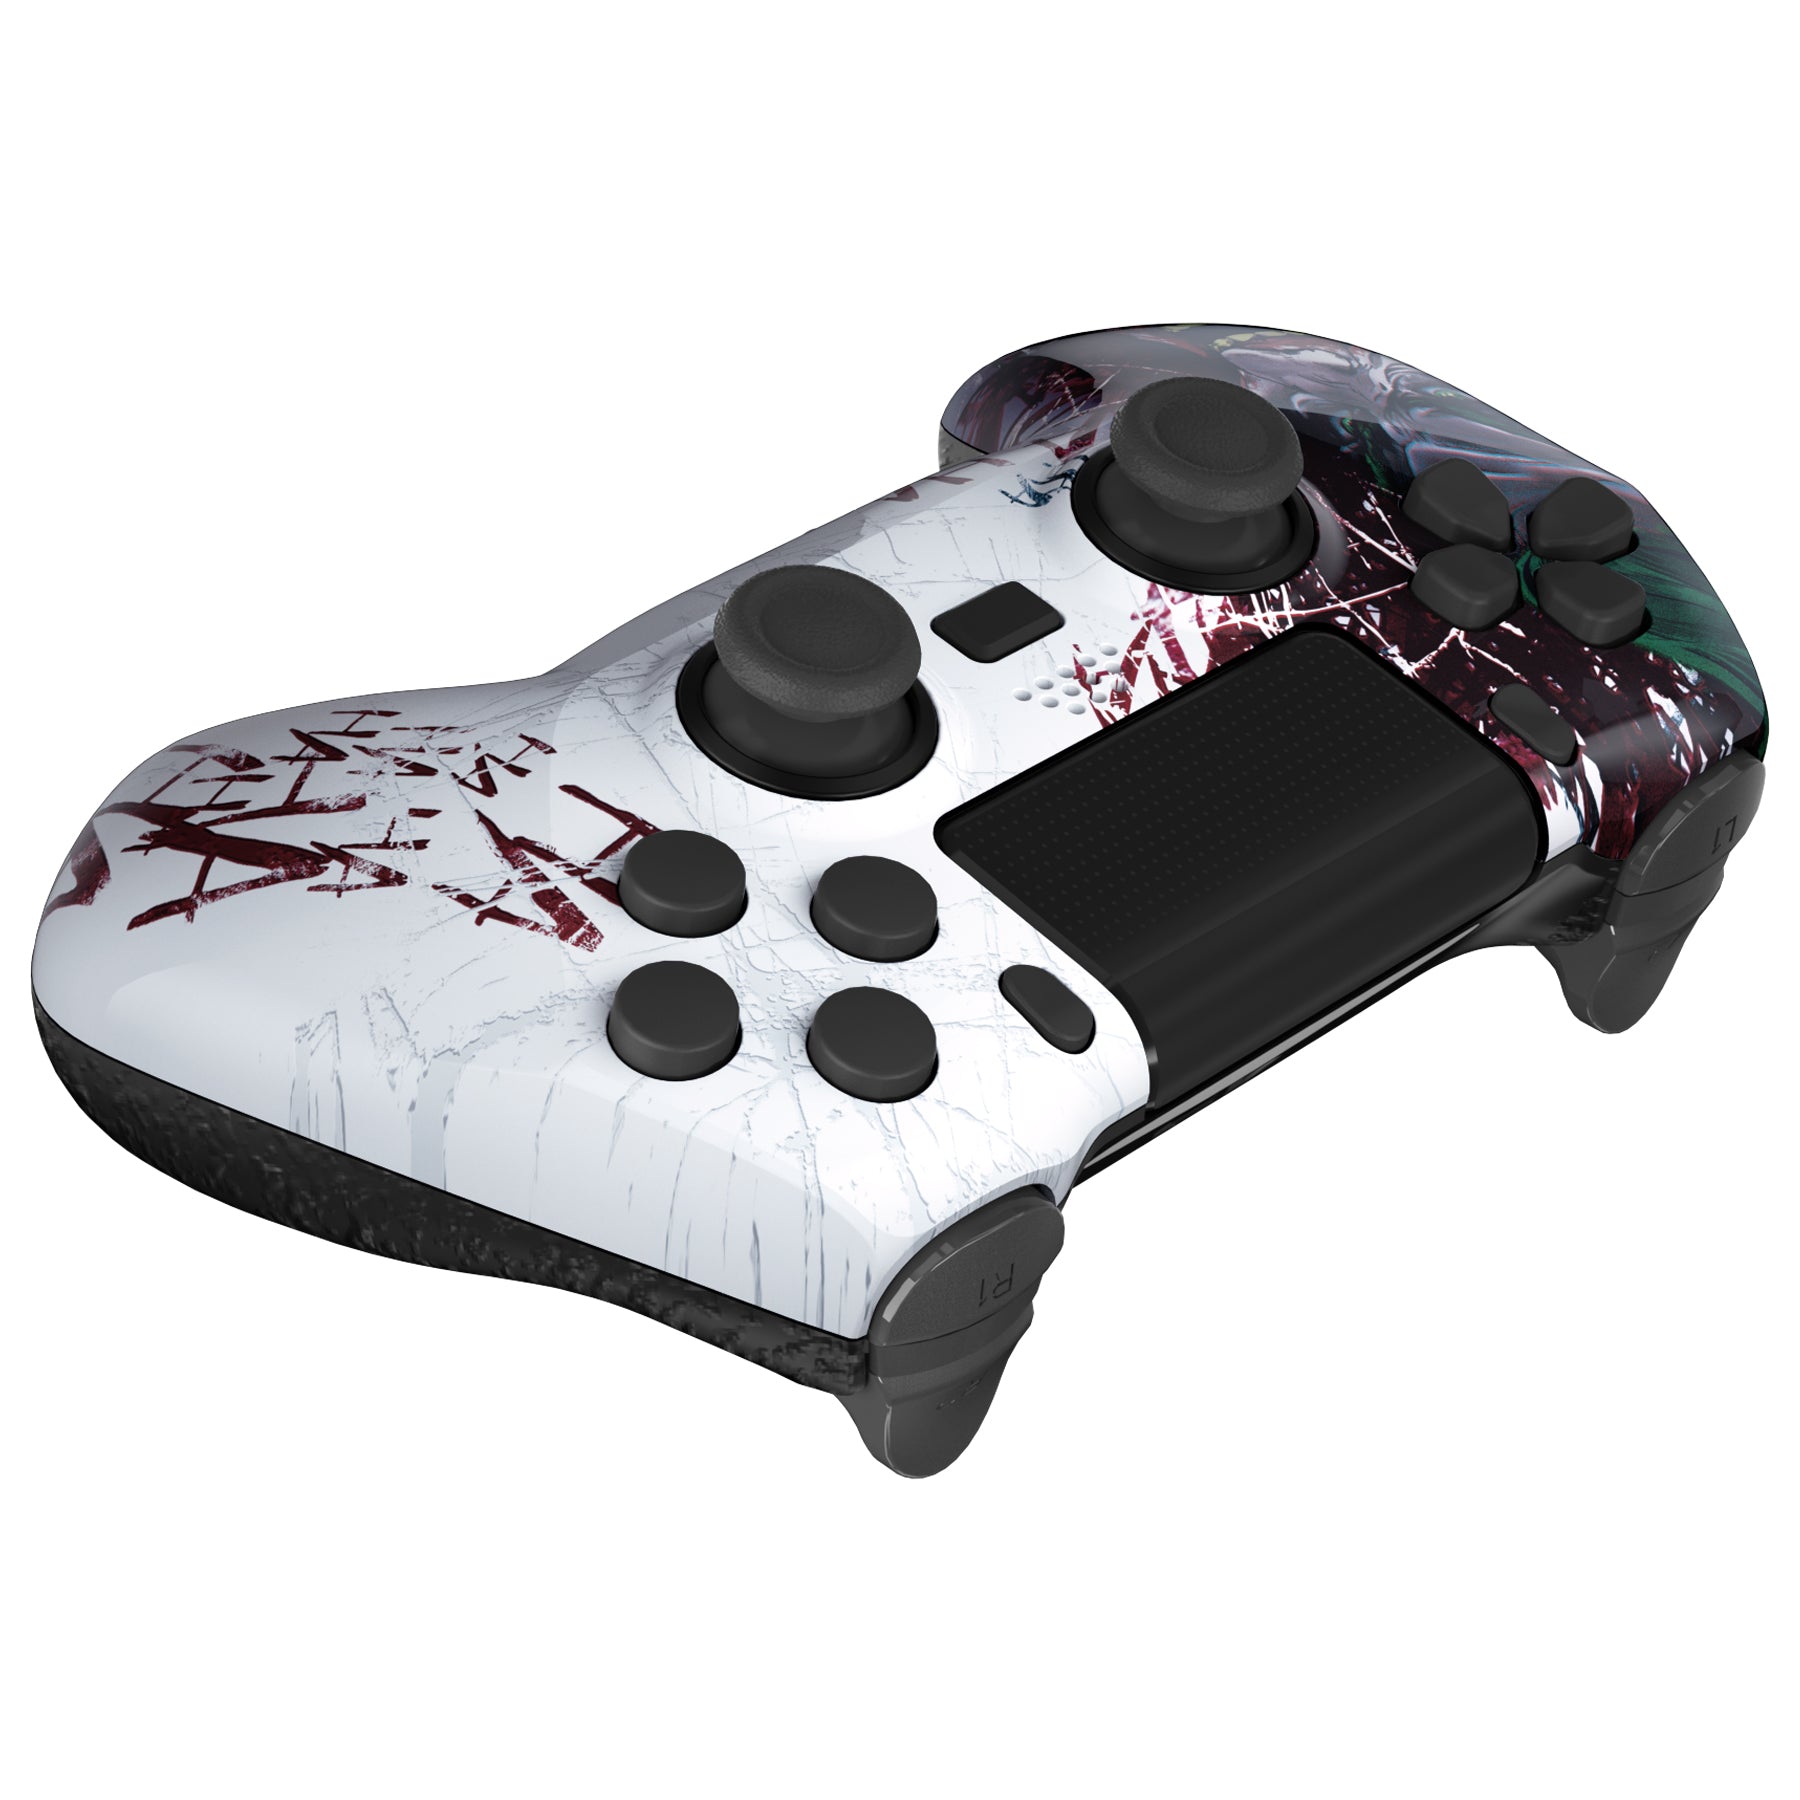 eXtremeRate Retail Clown HAHAHA DECADE Tournament Controller (DTC) Upgrade Kit for ps4 Controller JDM-040/050/055, Upgrade Board & Ergonomic Shell & Back Buttons & Trigger Stops - Controller NOT Included - P4MG011